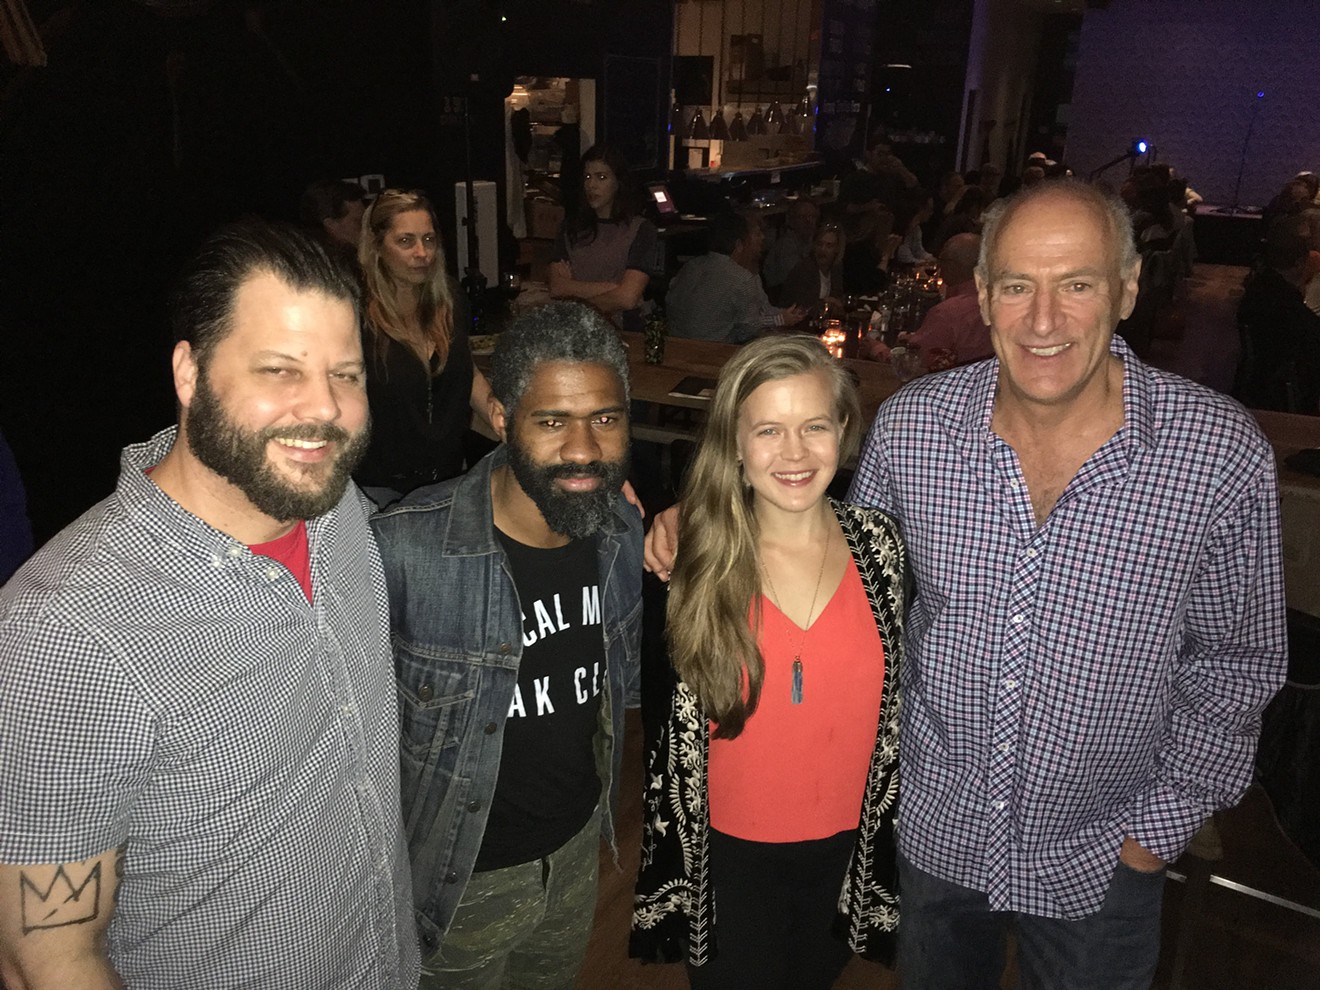 L to R: Cafe Momentum founder and CEO Chad Houser, musicians Kirk Thurmond and Emily Elbert and Rangers broadcaster Eric Nadel